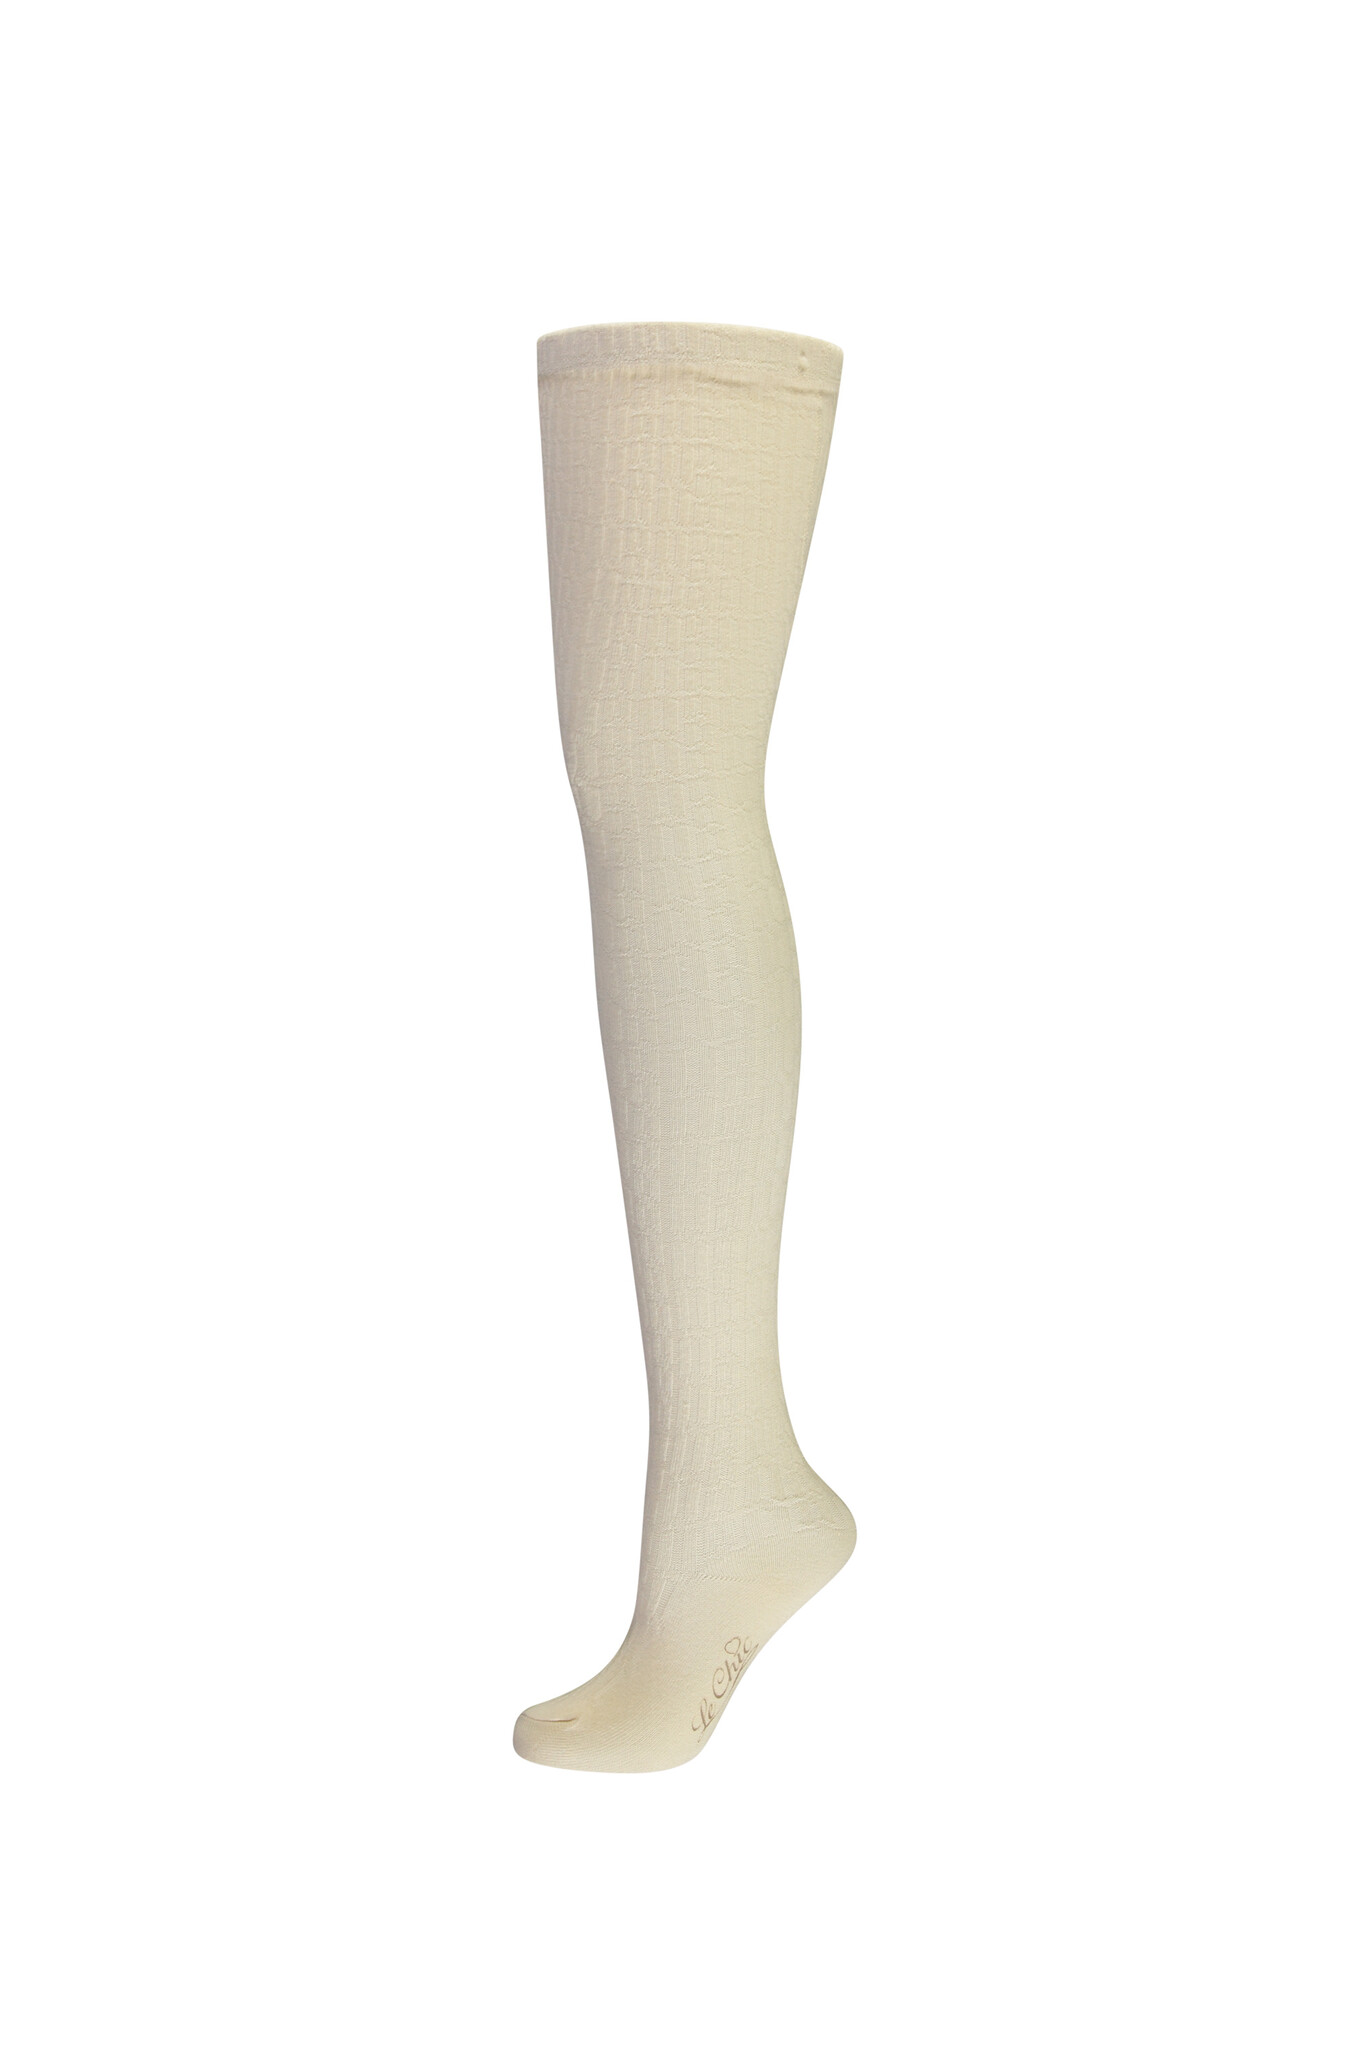 Le Chic C308-5910 Meisjes Maillot - Pearled Ivory - Maat 35-38